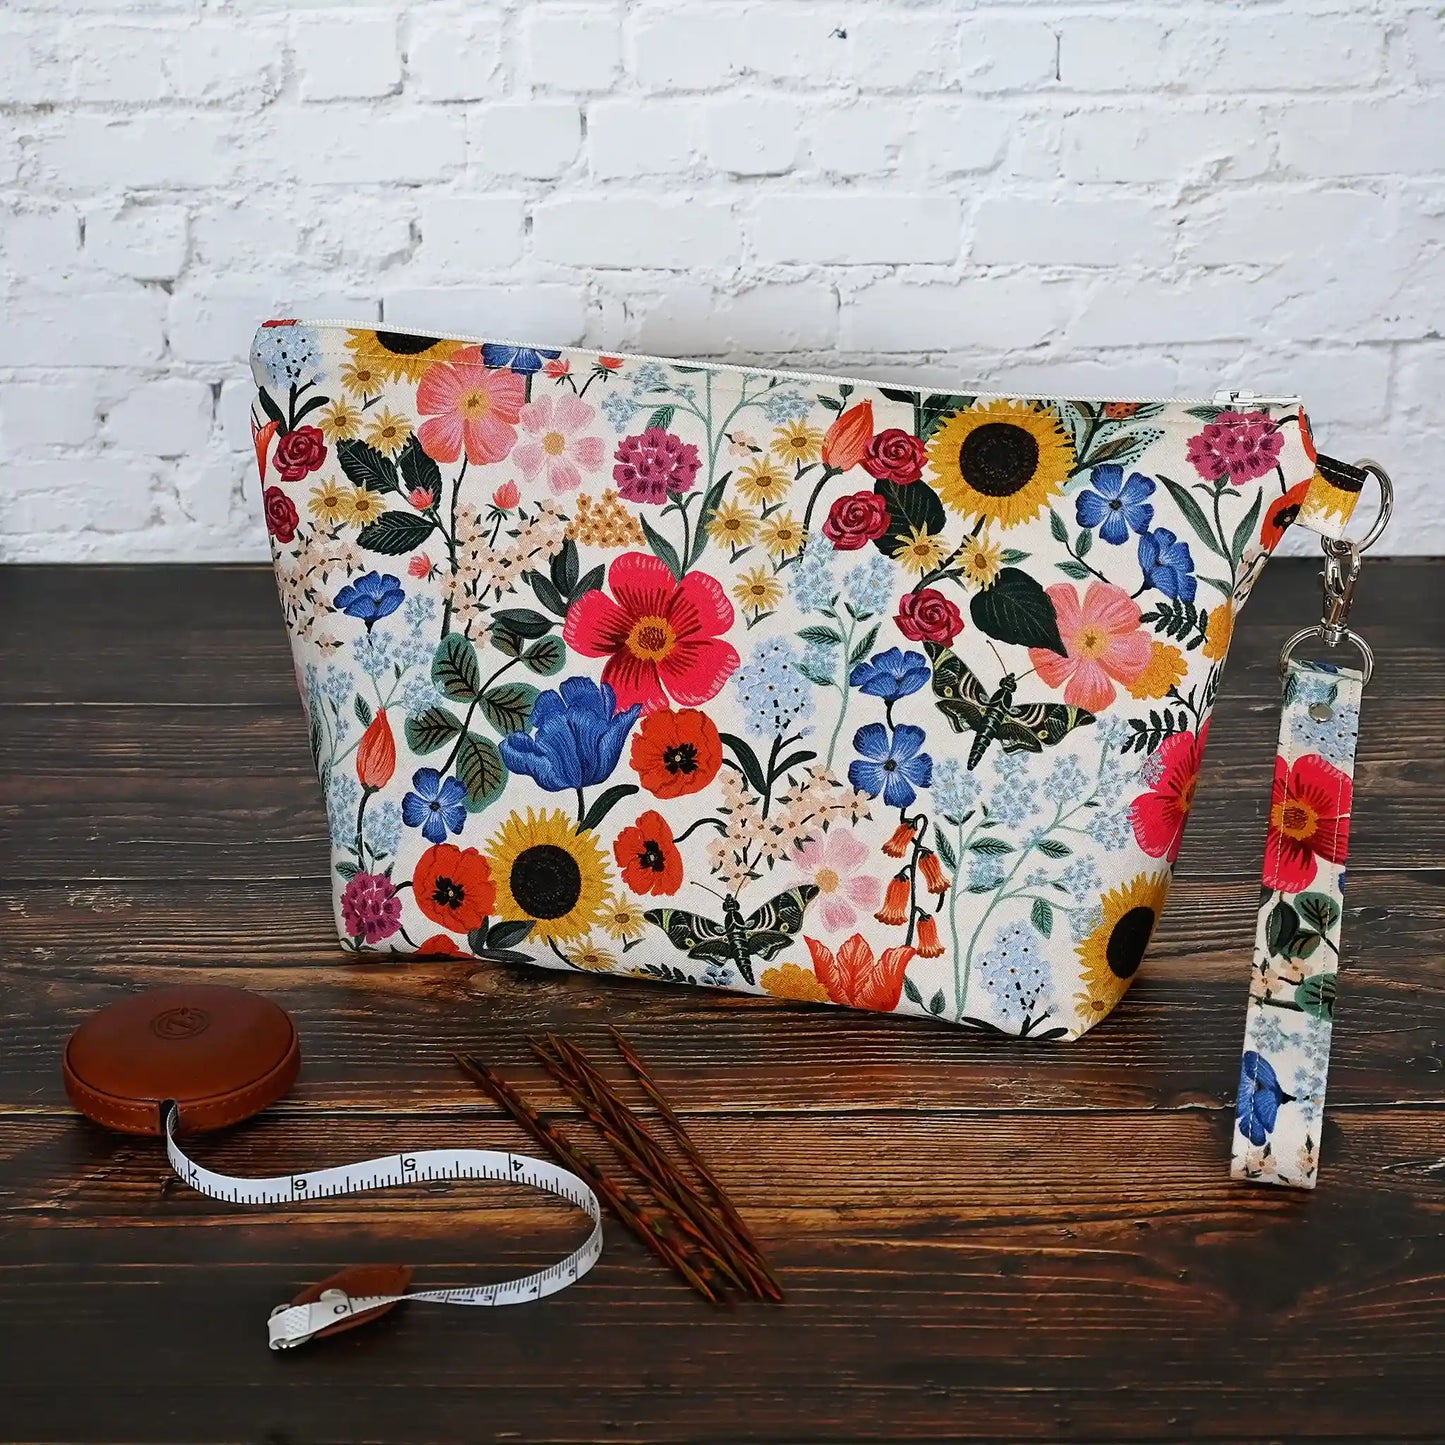 Pretty blush floral zippered pouch with wrist strap.  Made in Canada by Yellow Petal Handmade.